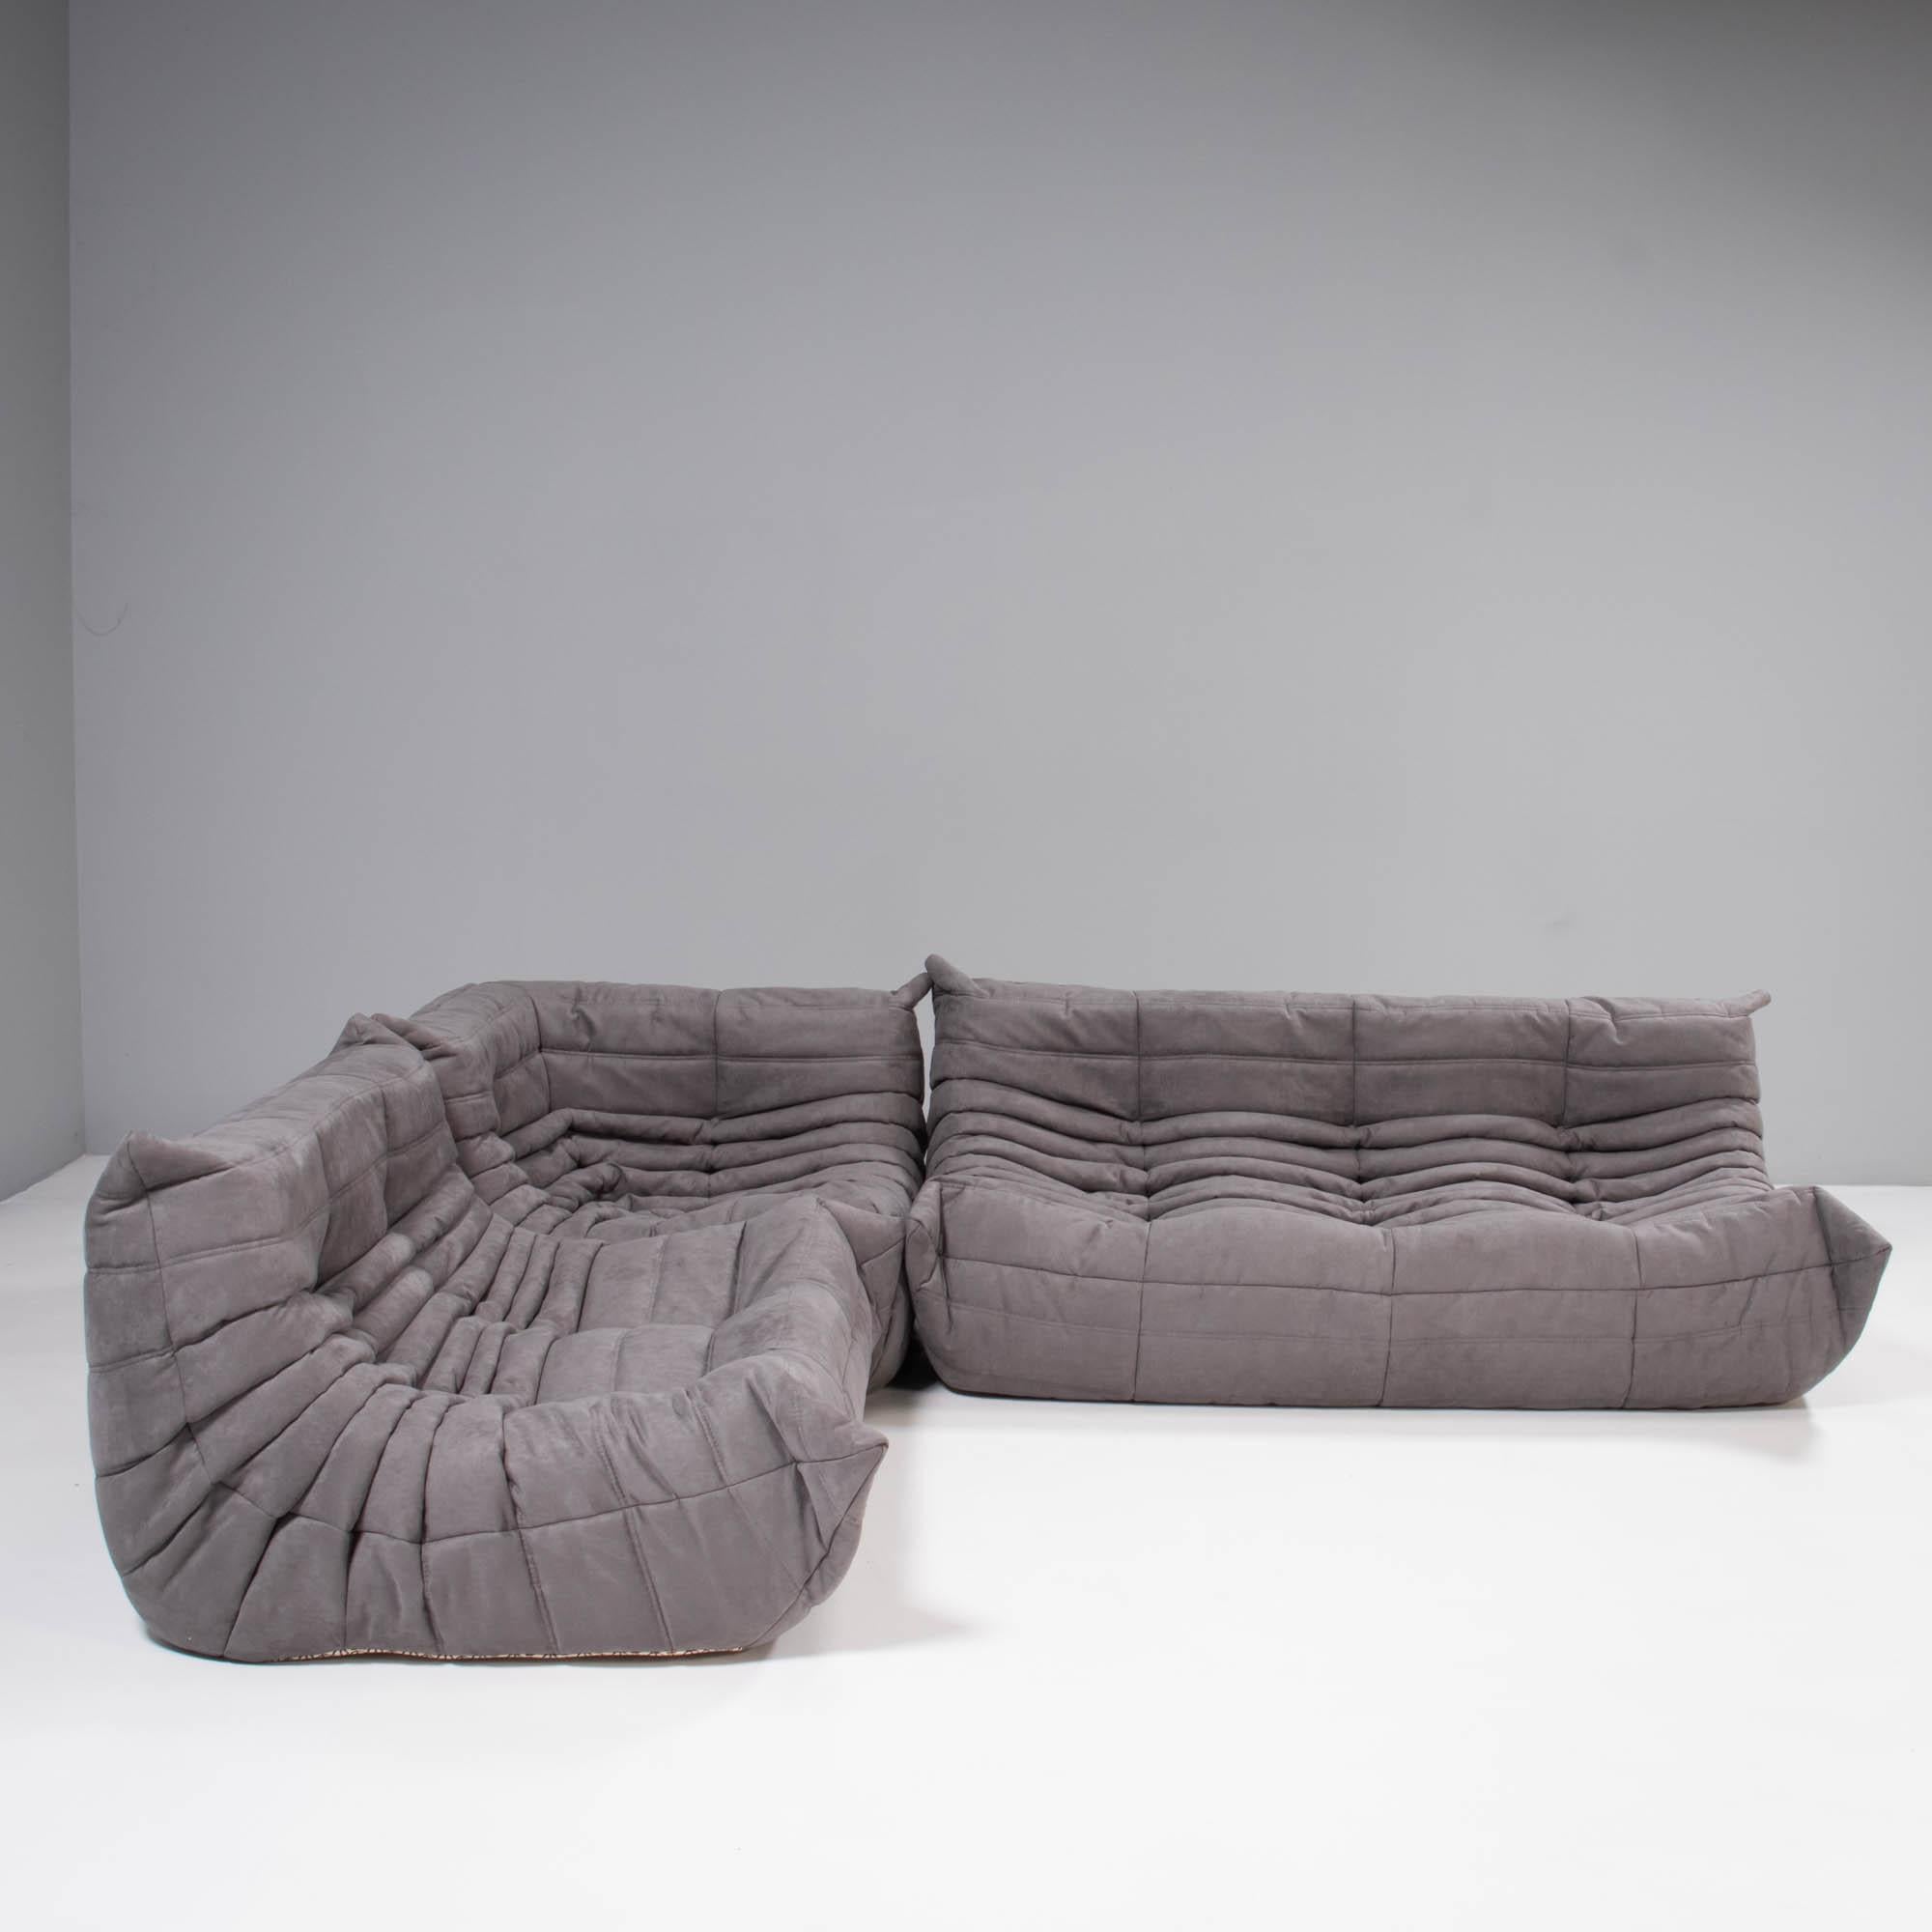 The iconic Togo sofa, originally designed by Michel Ducaroy for Ligne Roset in 1973 has become a design Classic.

This three-piece modular set is incredibly versatile and can be configured into one large corner sofa or split for a multitude of